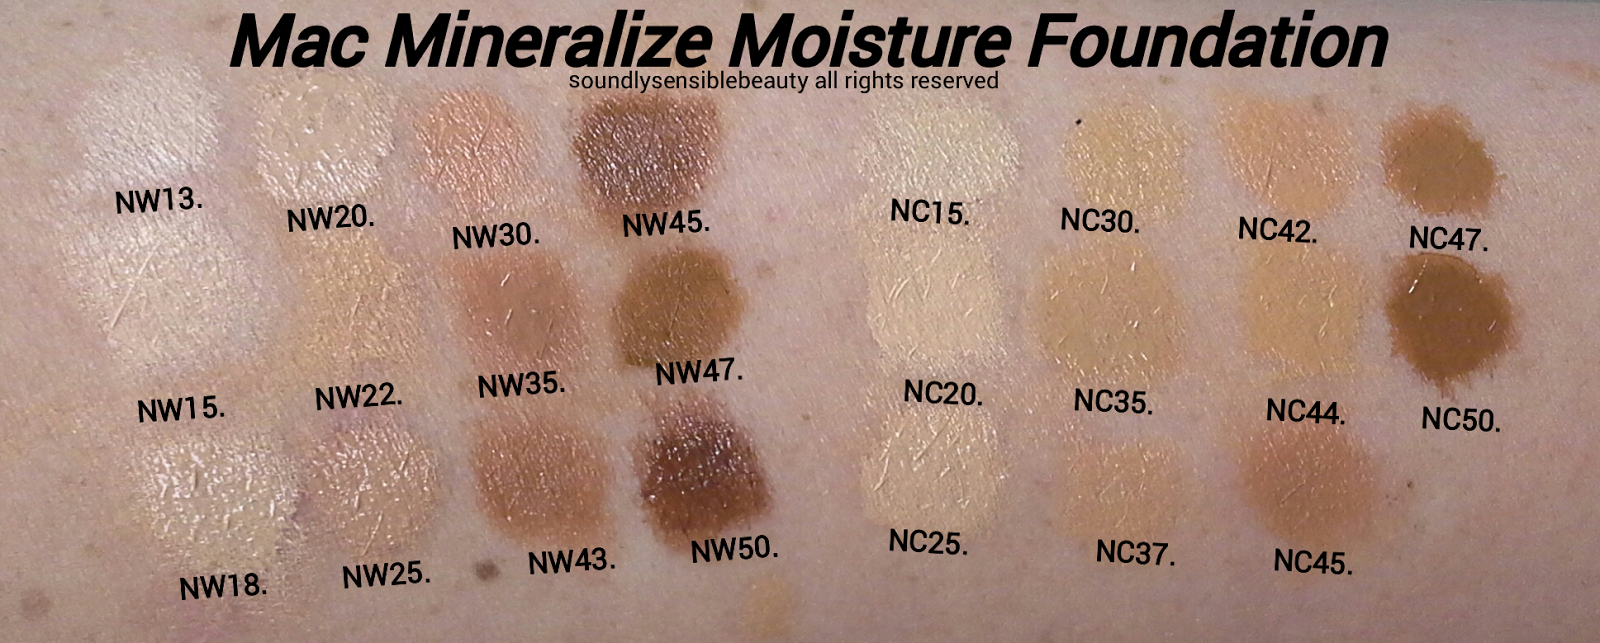 MAC Mineralize Moisture Foundation (Liquid) SPF 15; Review & Swatches of  Shades